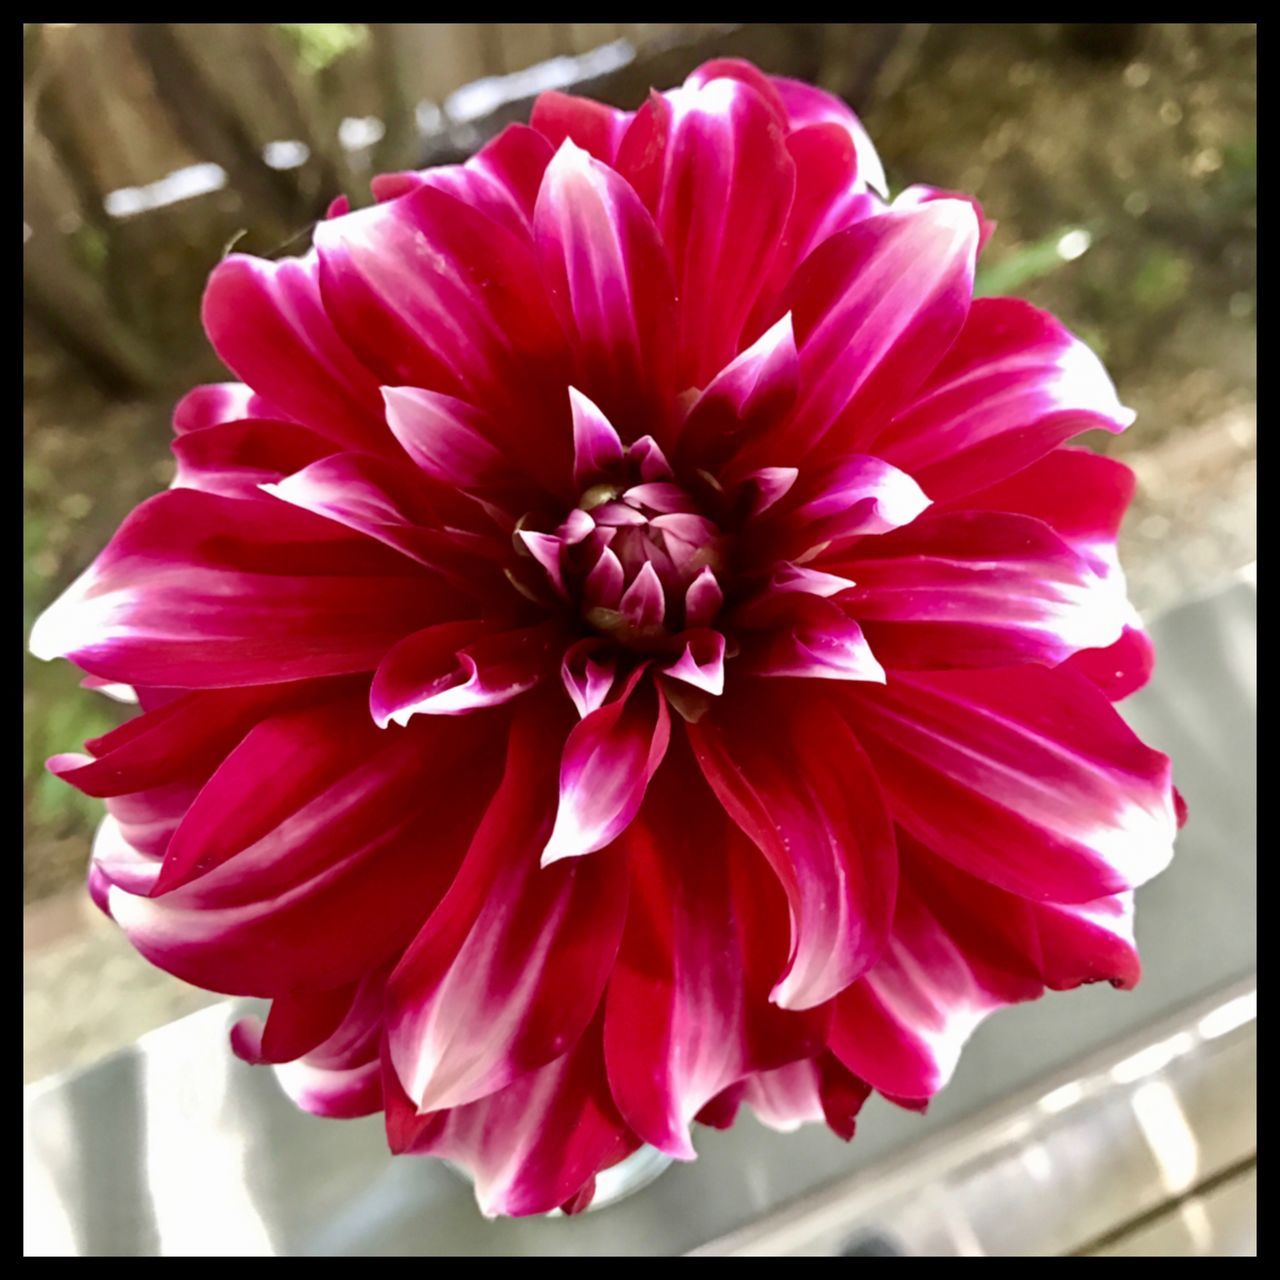 flower, fragility, petal, beauty in nature, nature, flower head, freshness, close-up, blooming, growth, plant, no people, pink color, day, outdoors, dahlia